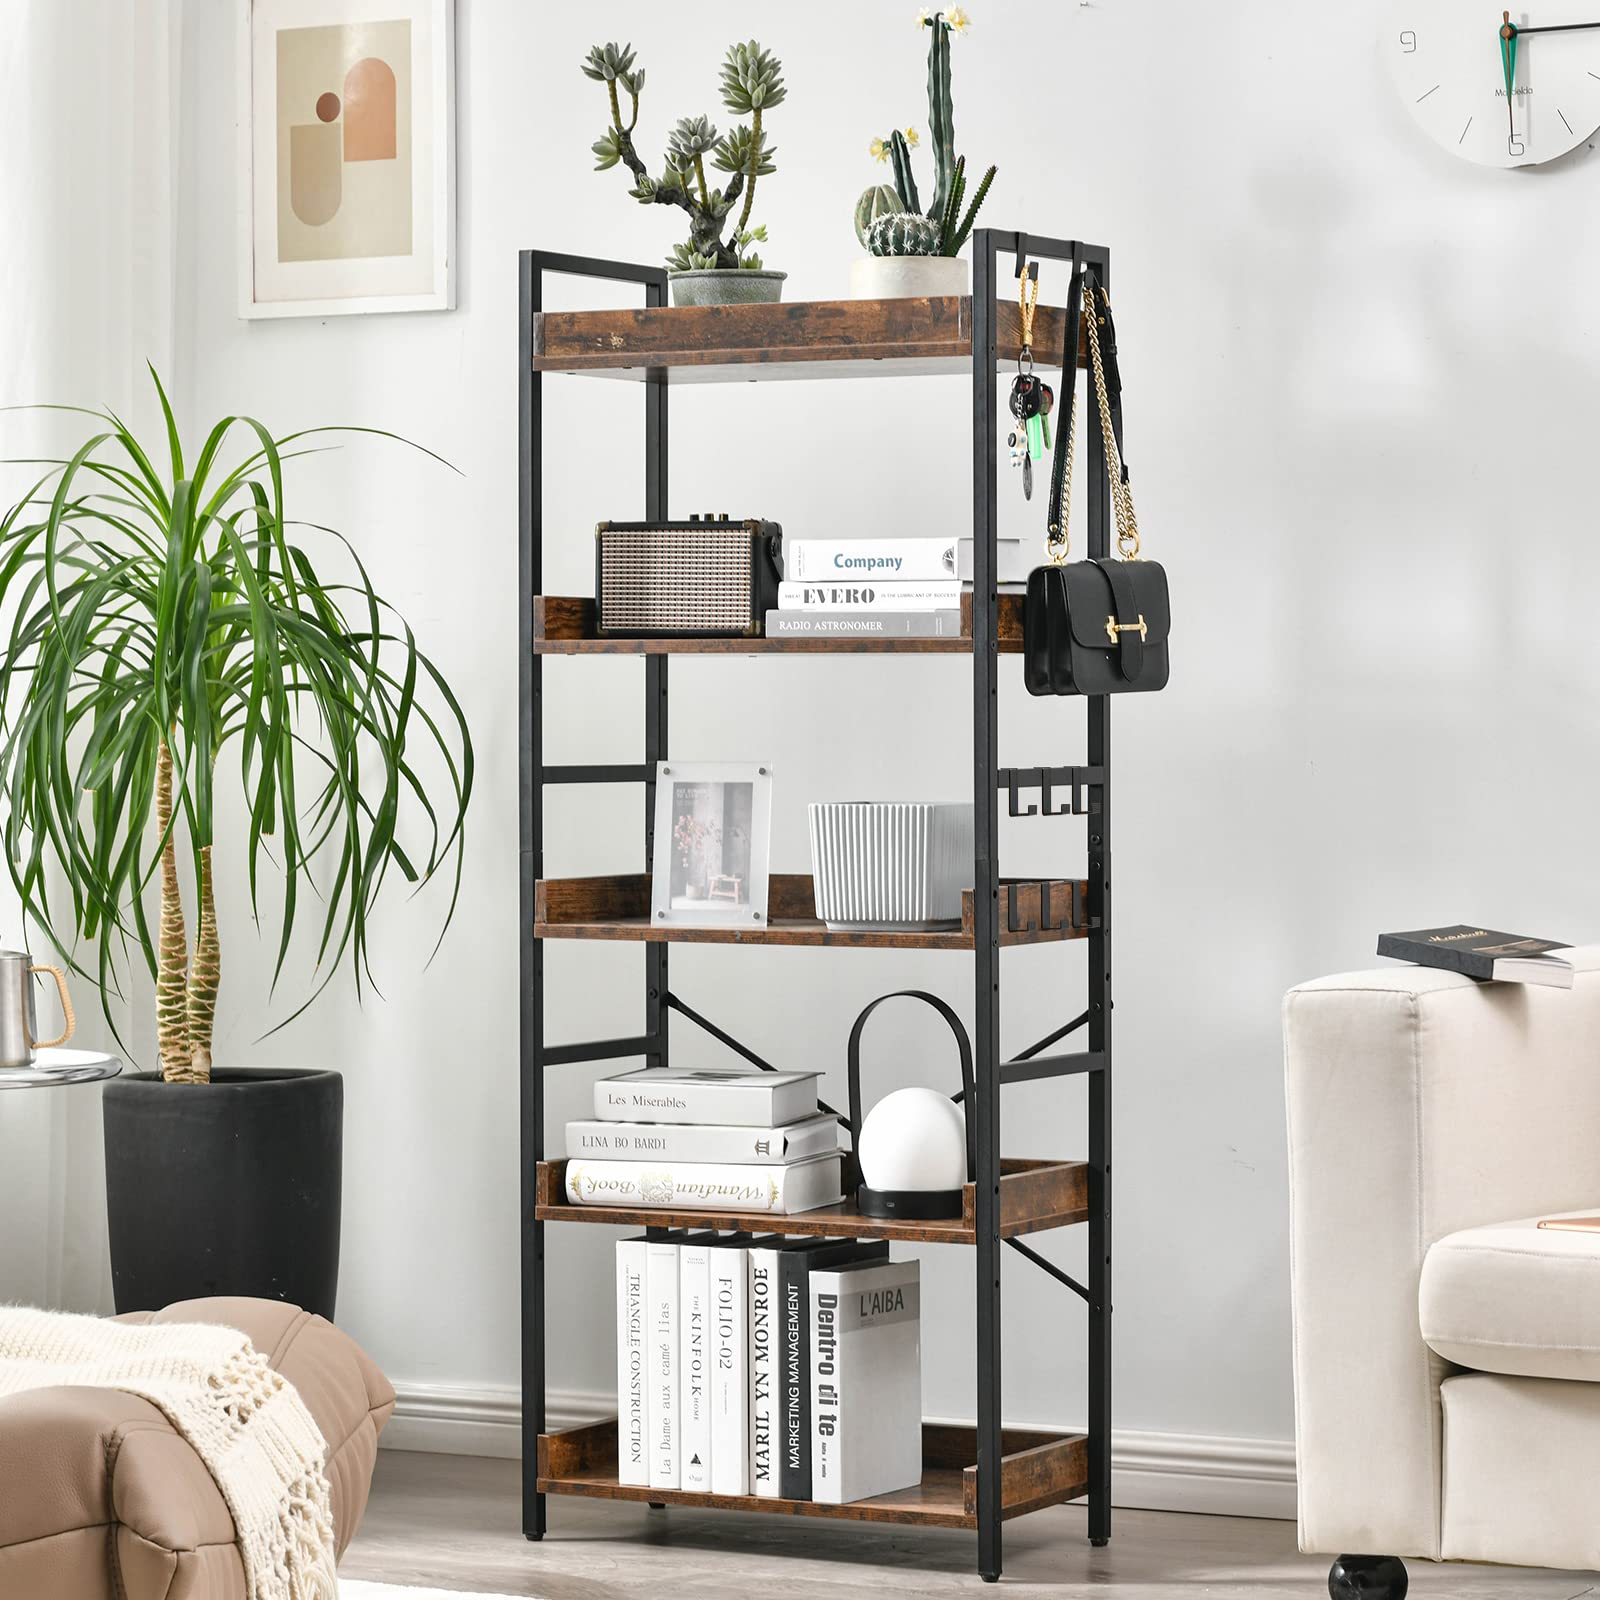 HCHQHS Bookshelf Adjustable 5 Tier Open Bookcase,Rustic Farmhouse Book Shelves, Industrial Wood and Black Metal Bookshelves,Mid Century Bookcase for Home Office Living Room Bedroom (Rustic, 5 Tier)